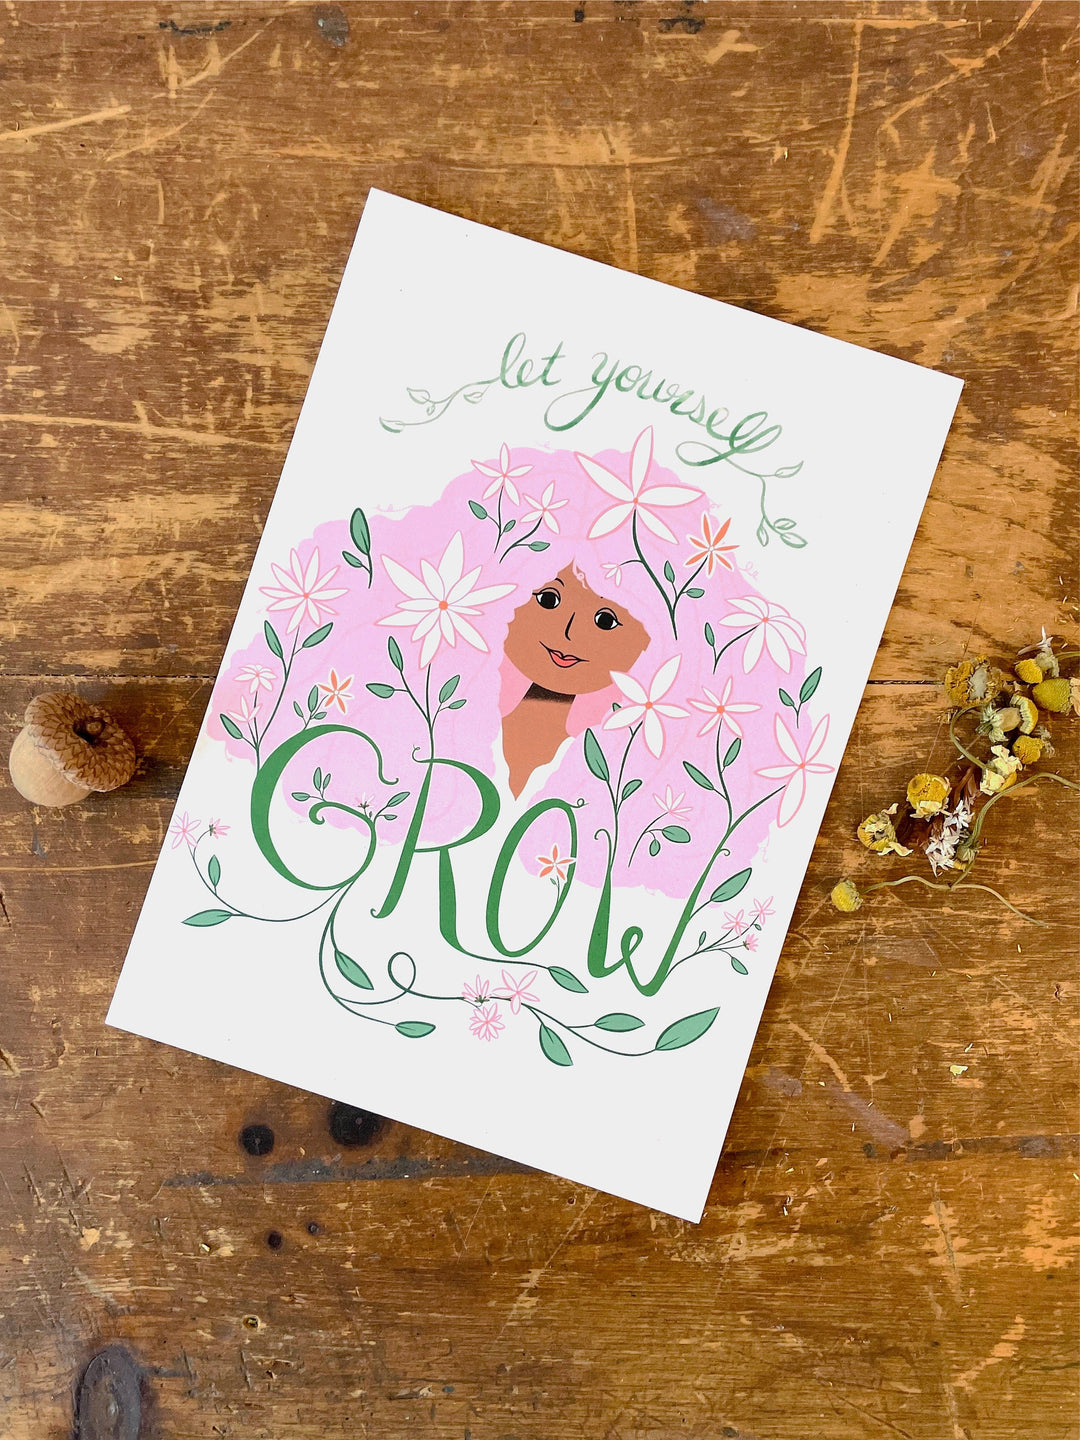 Encouragement Greeting Cards